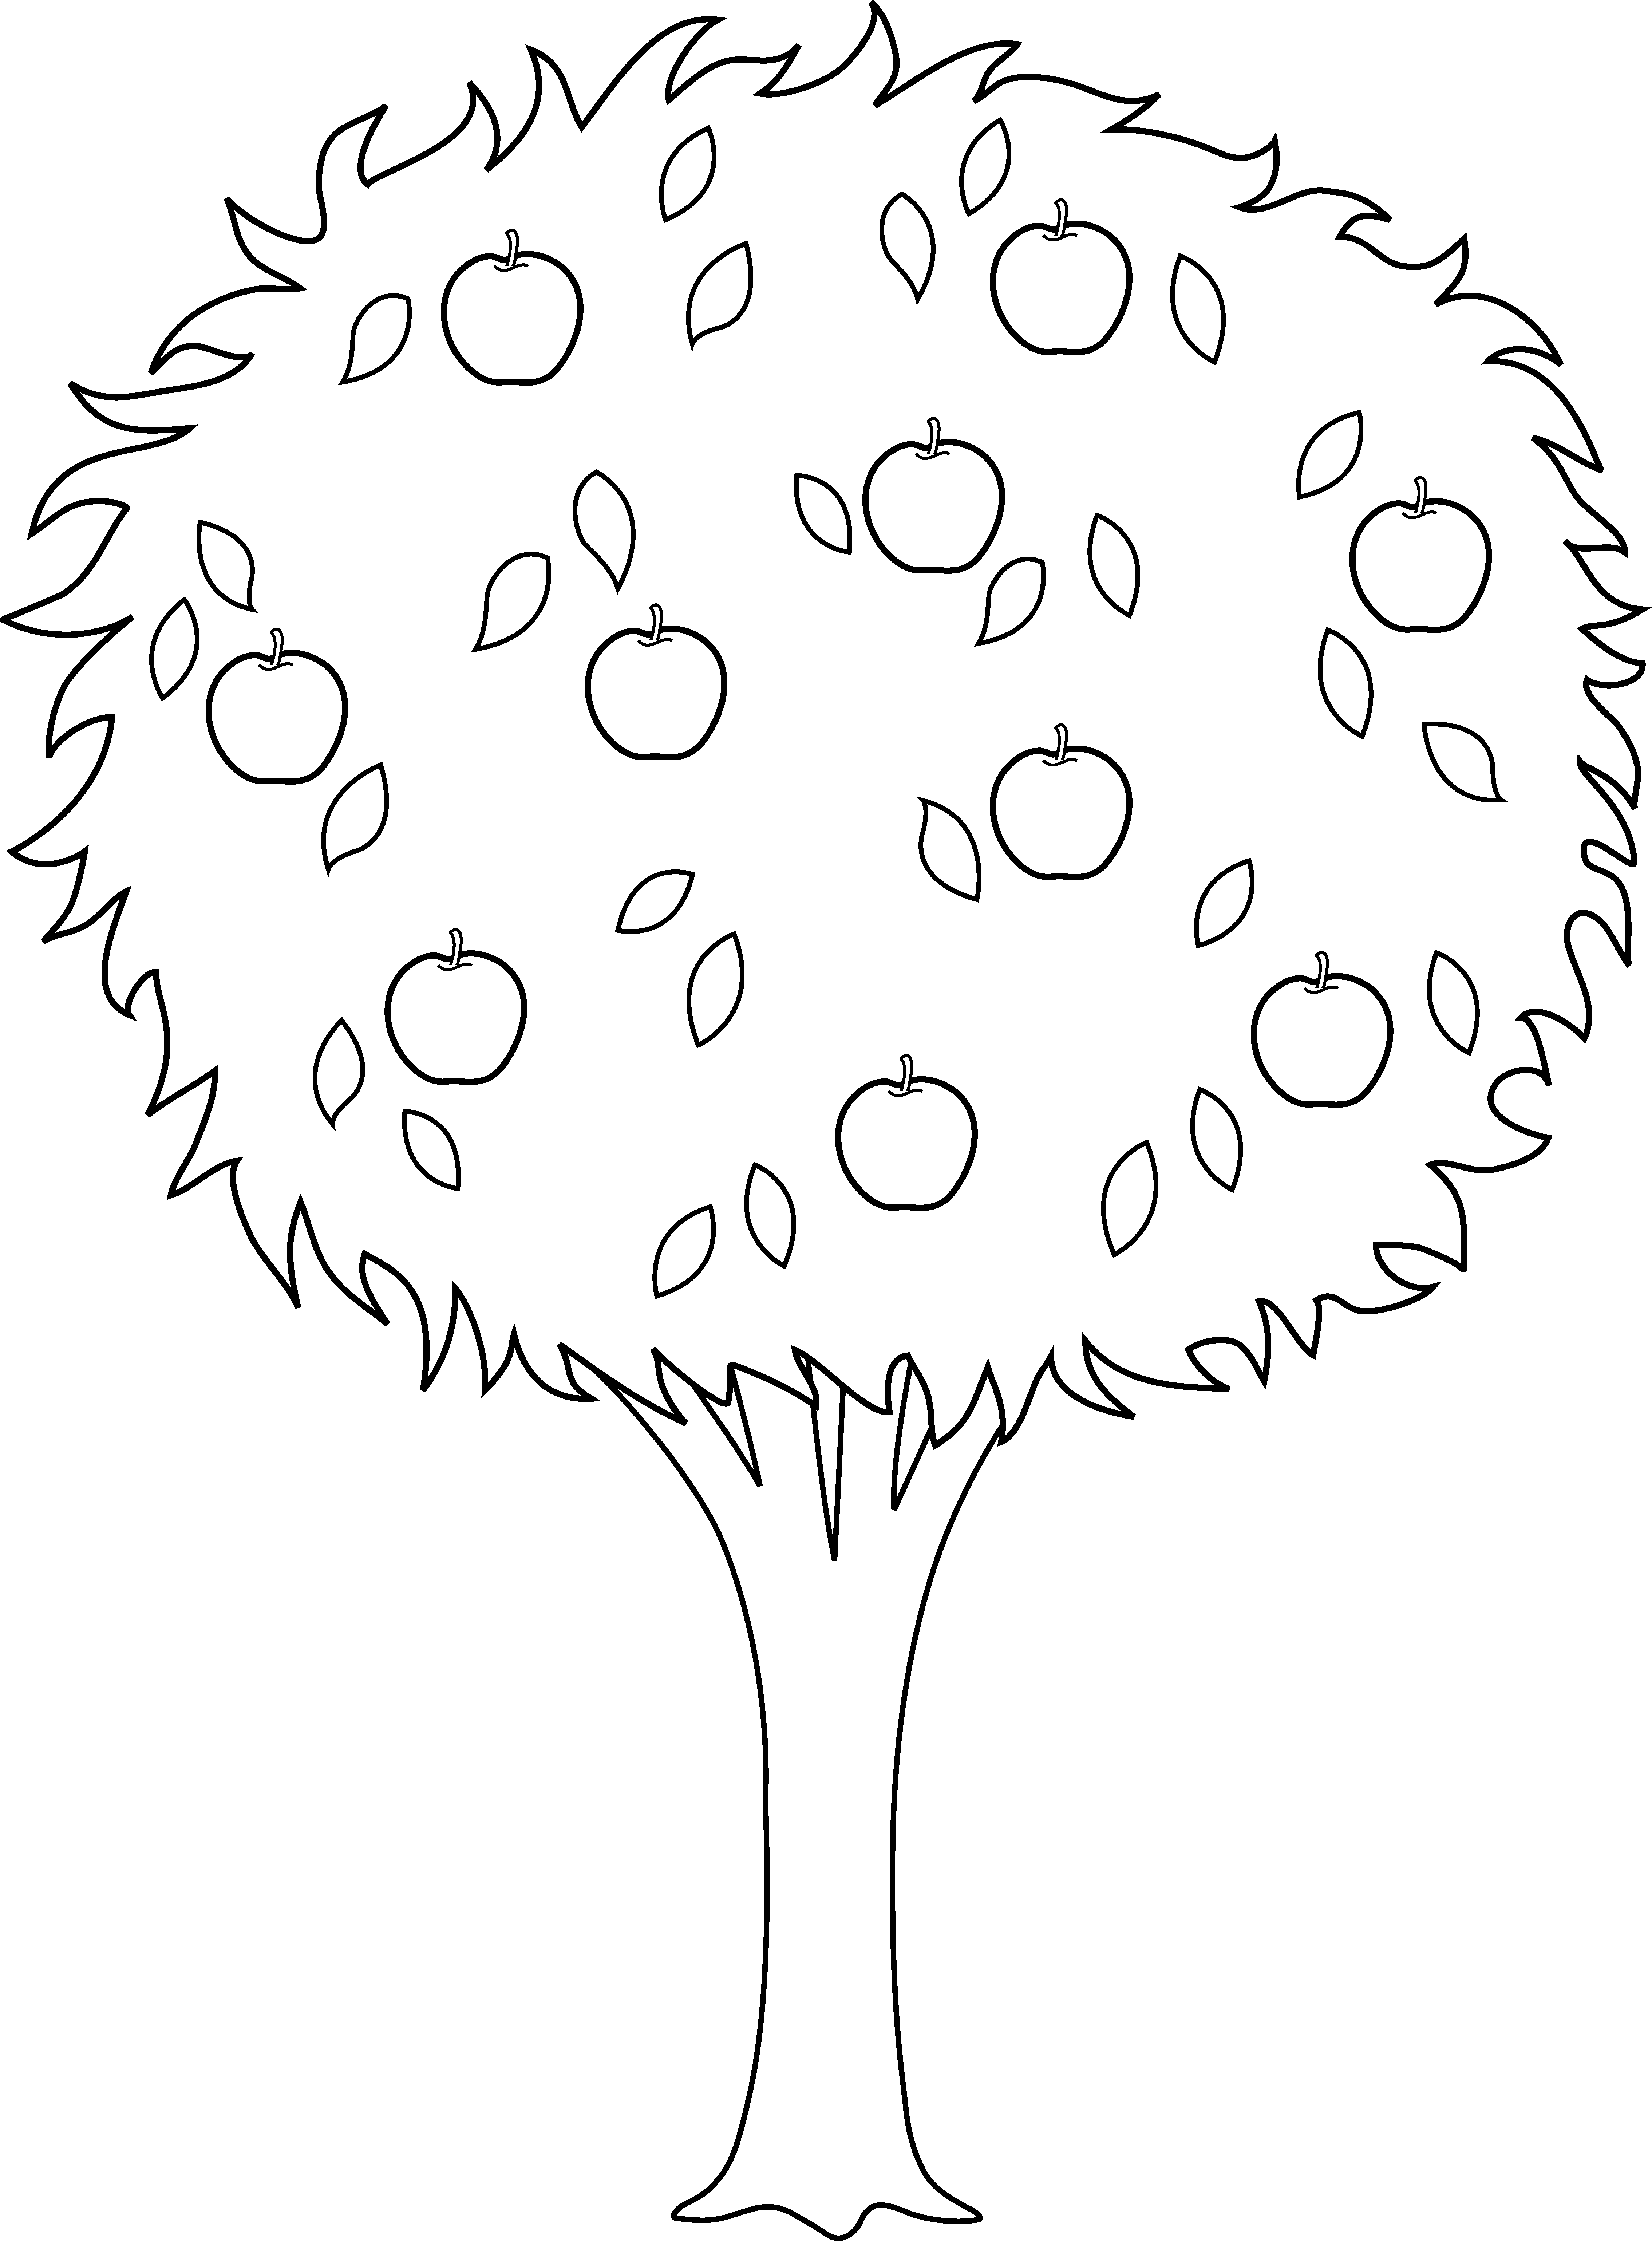 apple-tree-55-nature-printable-coloring-pages